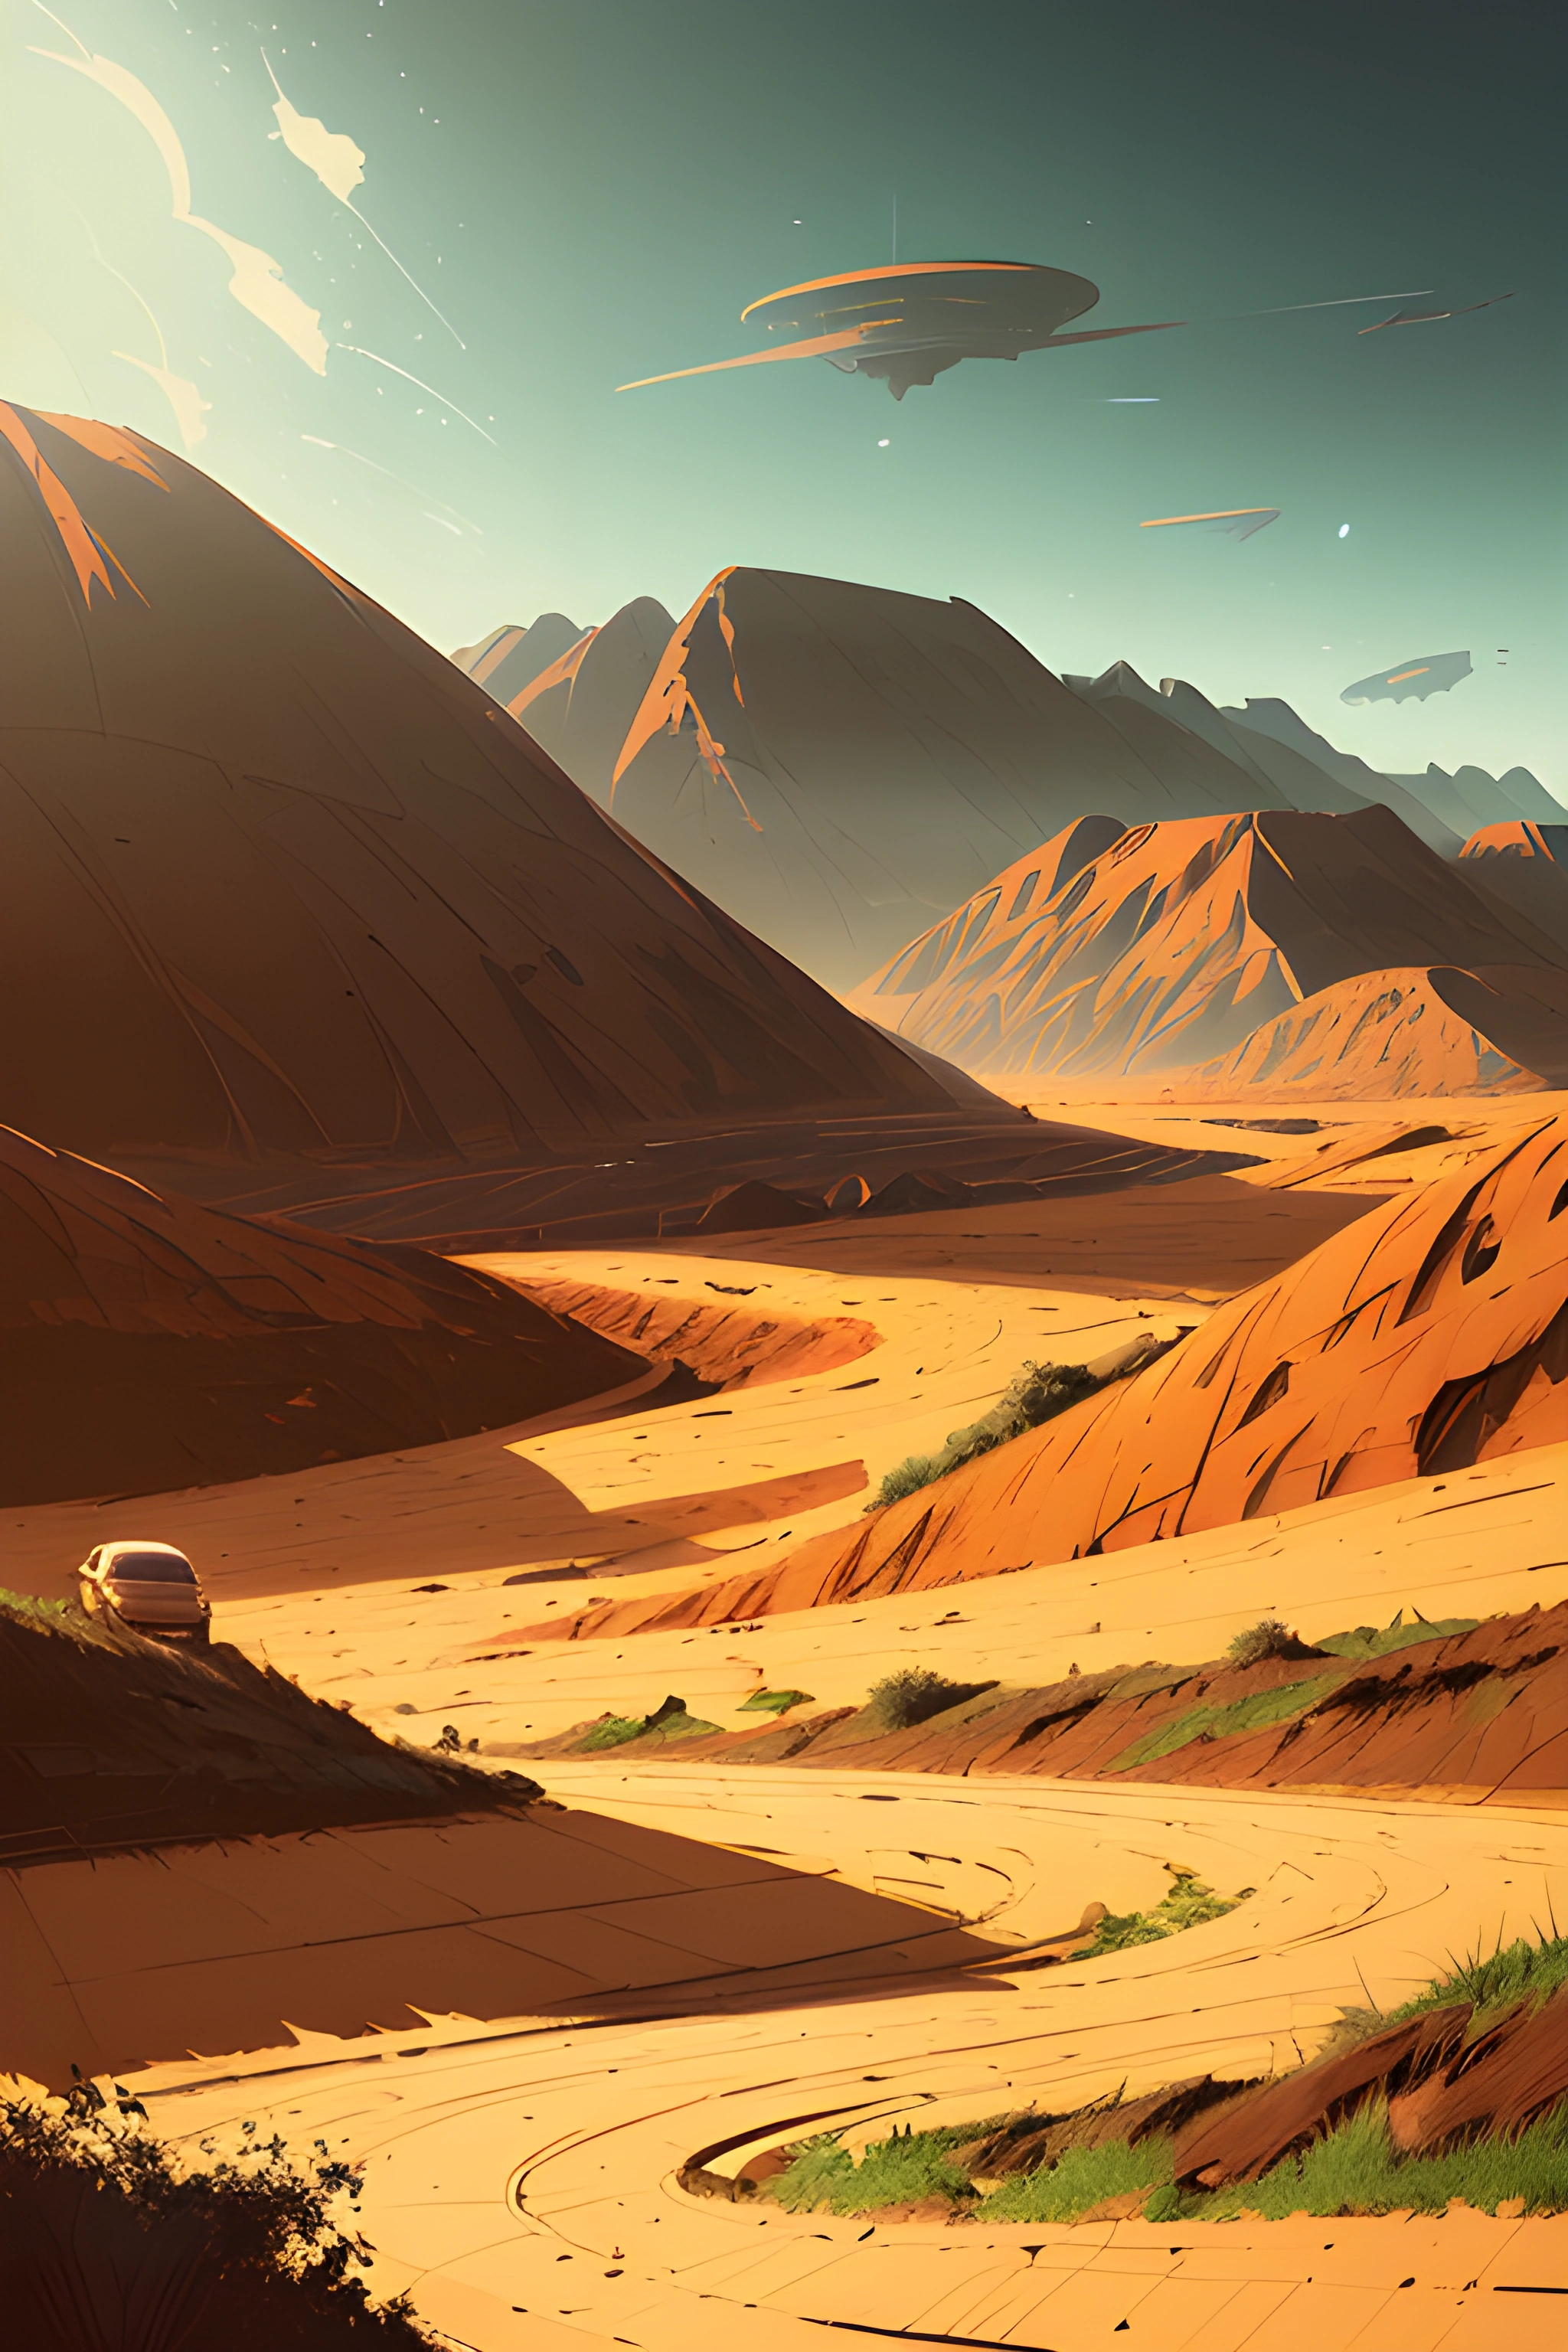 a car driving through a desert with mountains in the background